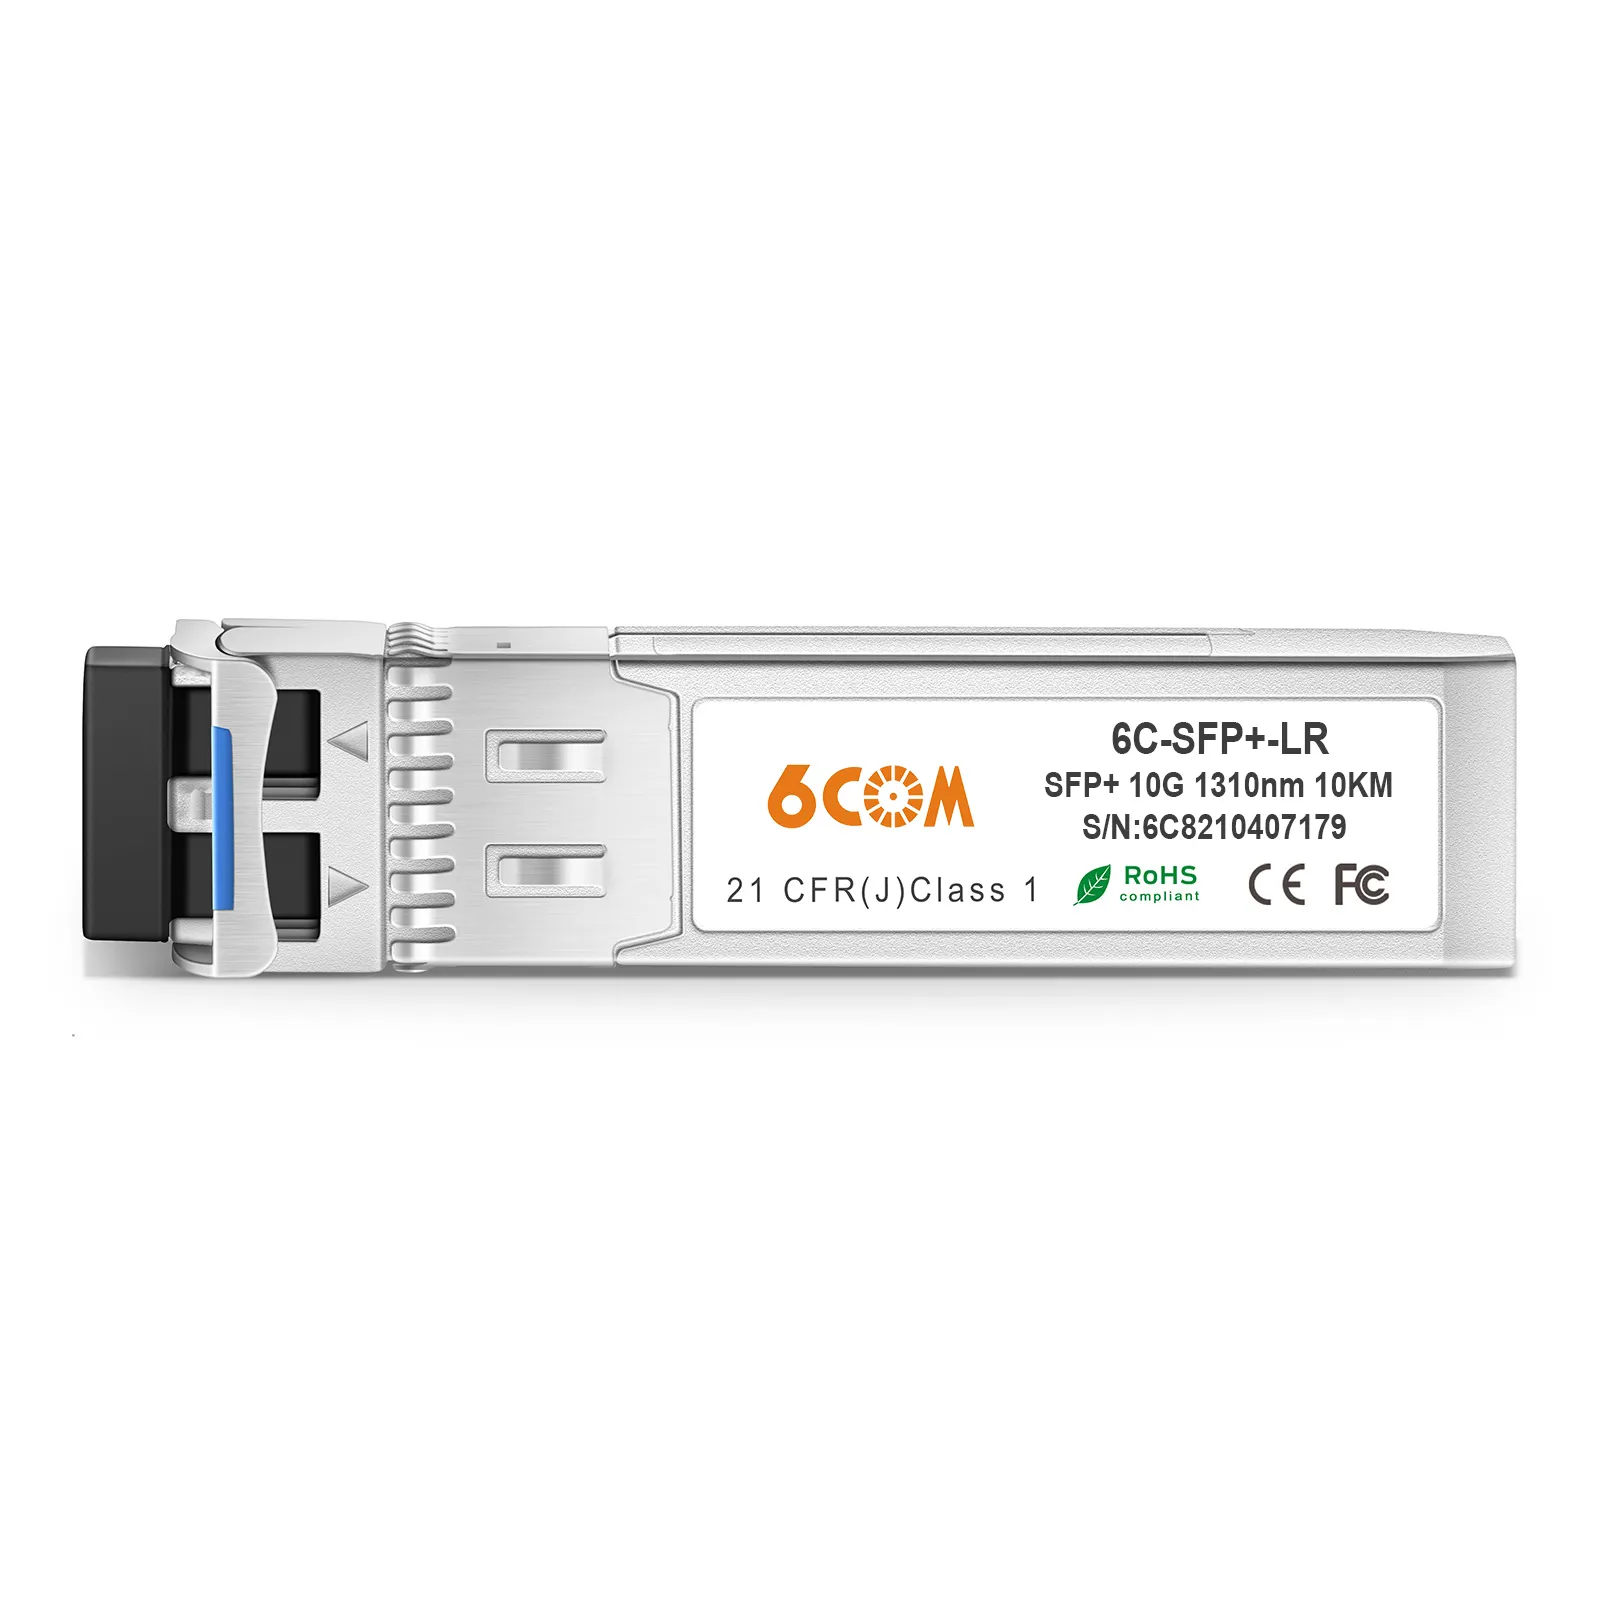 10g sfp module 10GBASE-LR SFP+ 1310nm 10km LC Transceiver Compatible for Alcatel-Lucent SFP-10G-LR/iSFP-10G-LR/3HE04823AA